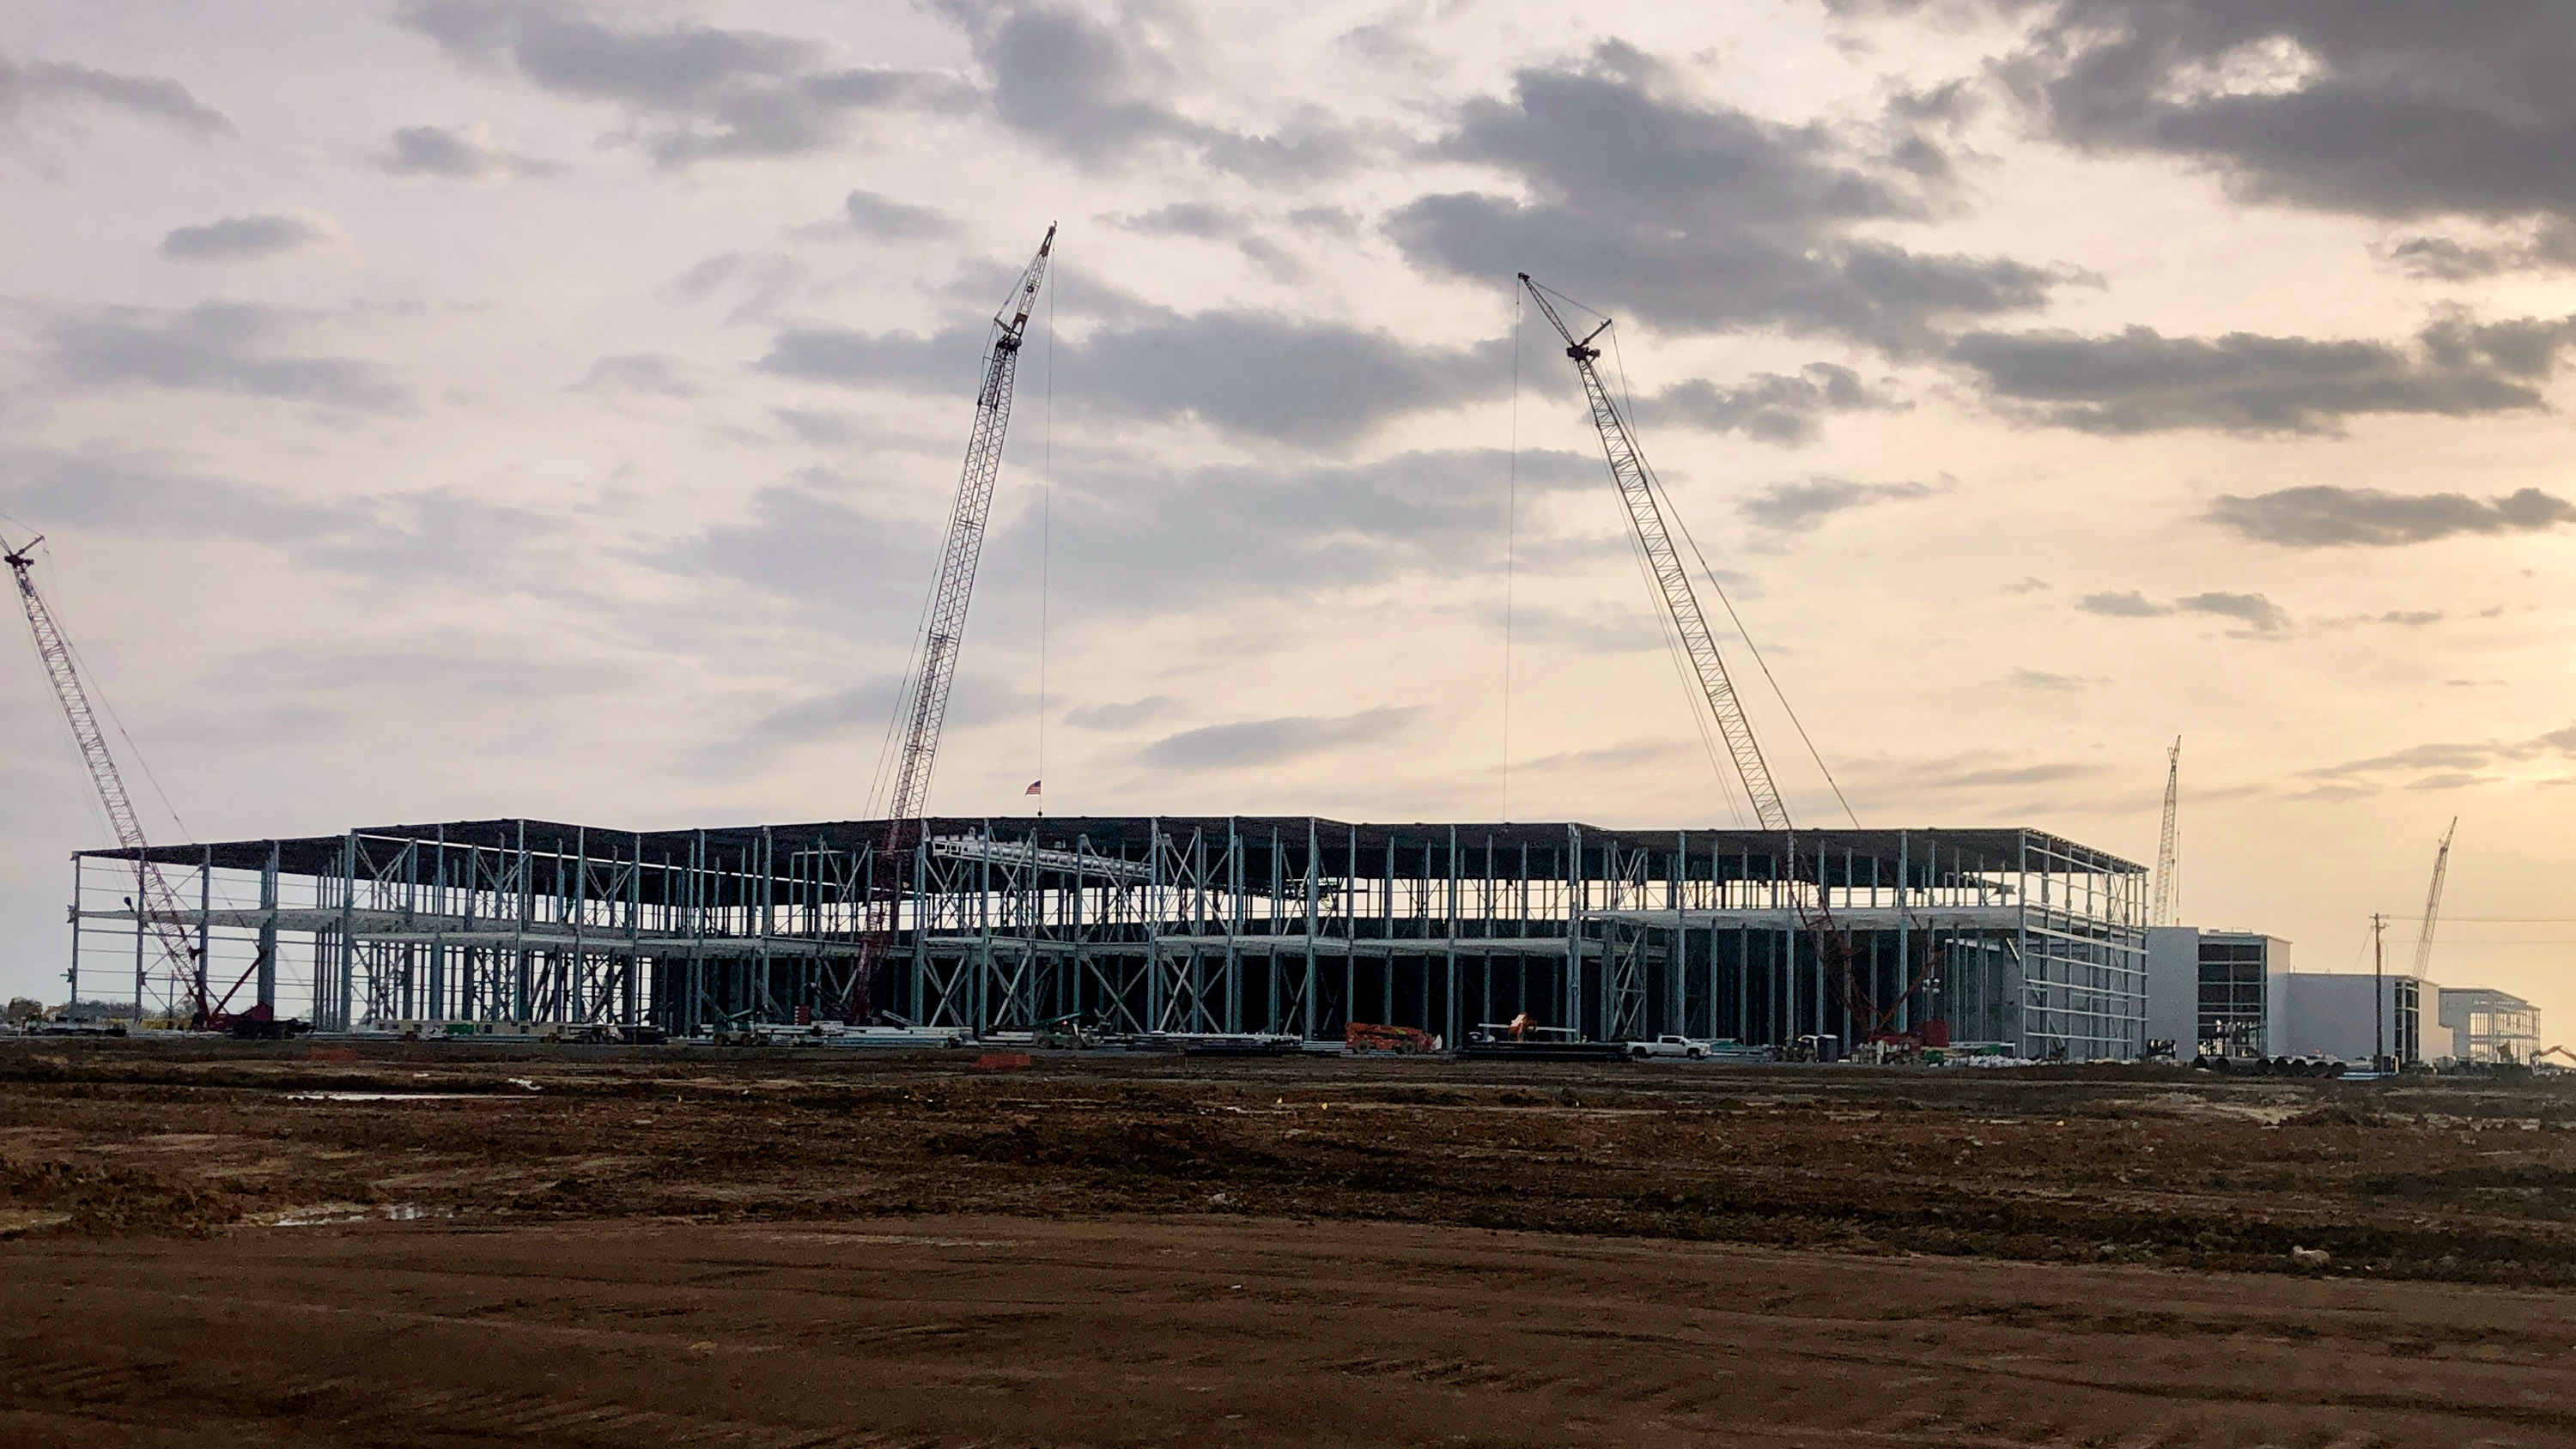 Construction continues on a battery plant, part of a $5.6 billion joint project by Ford Motor Co. and battery maker SK on March 24, 2023, in Stanton, Tenn